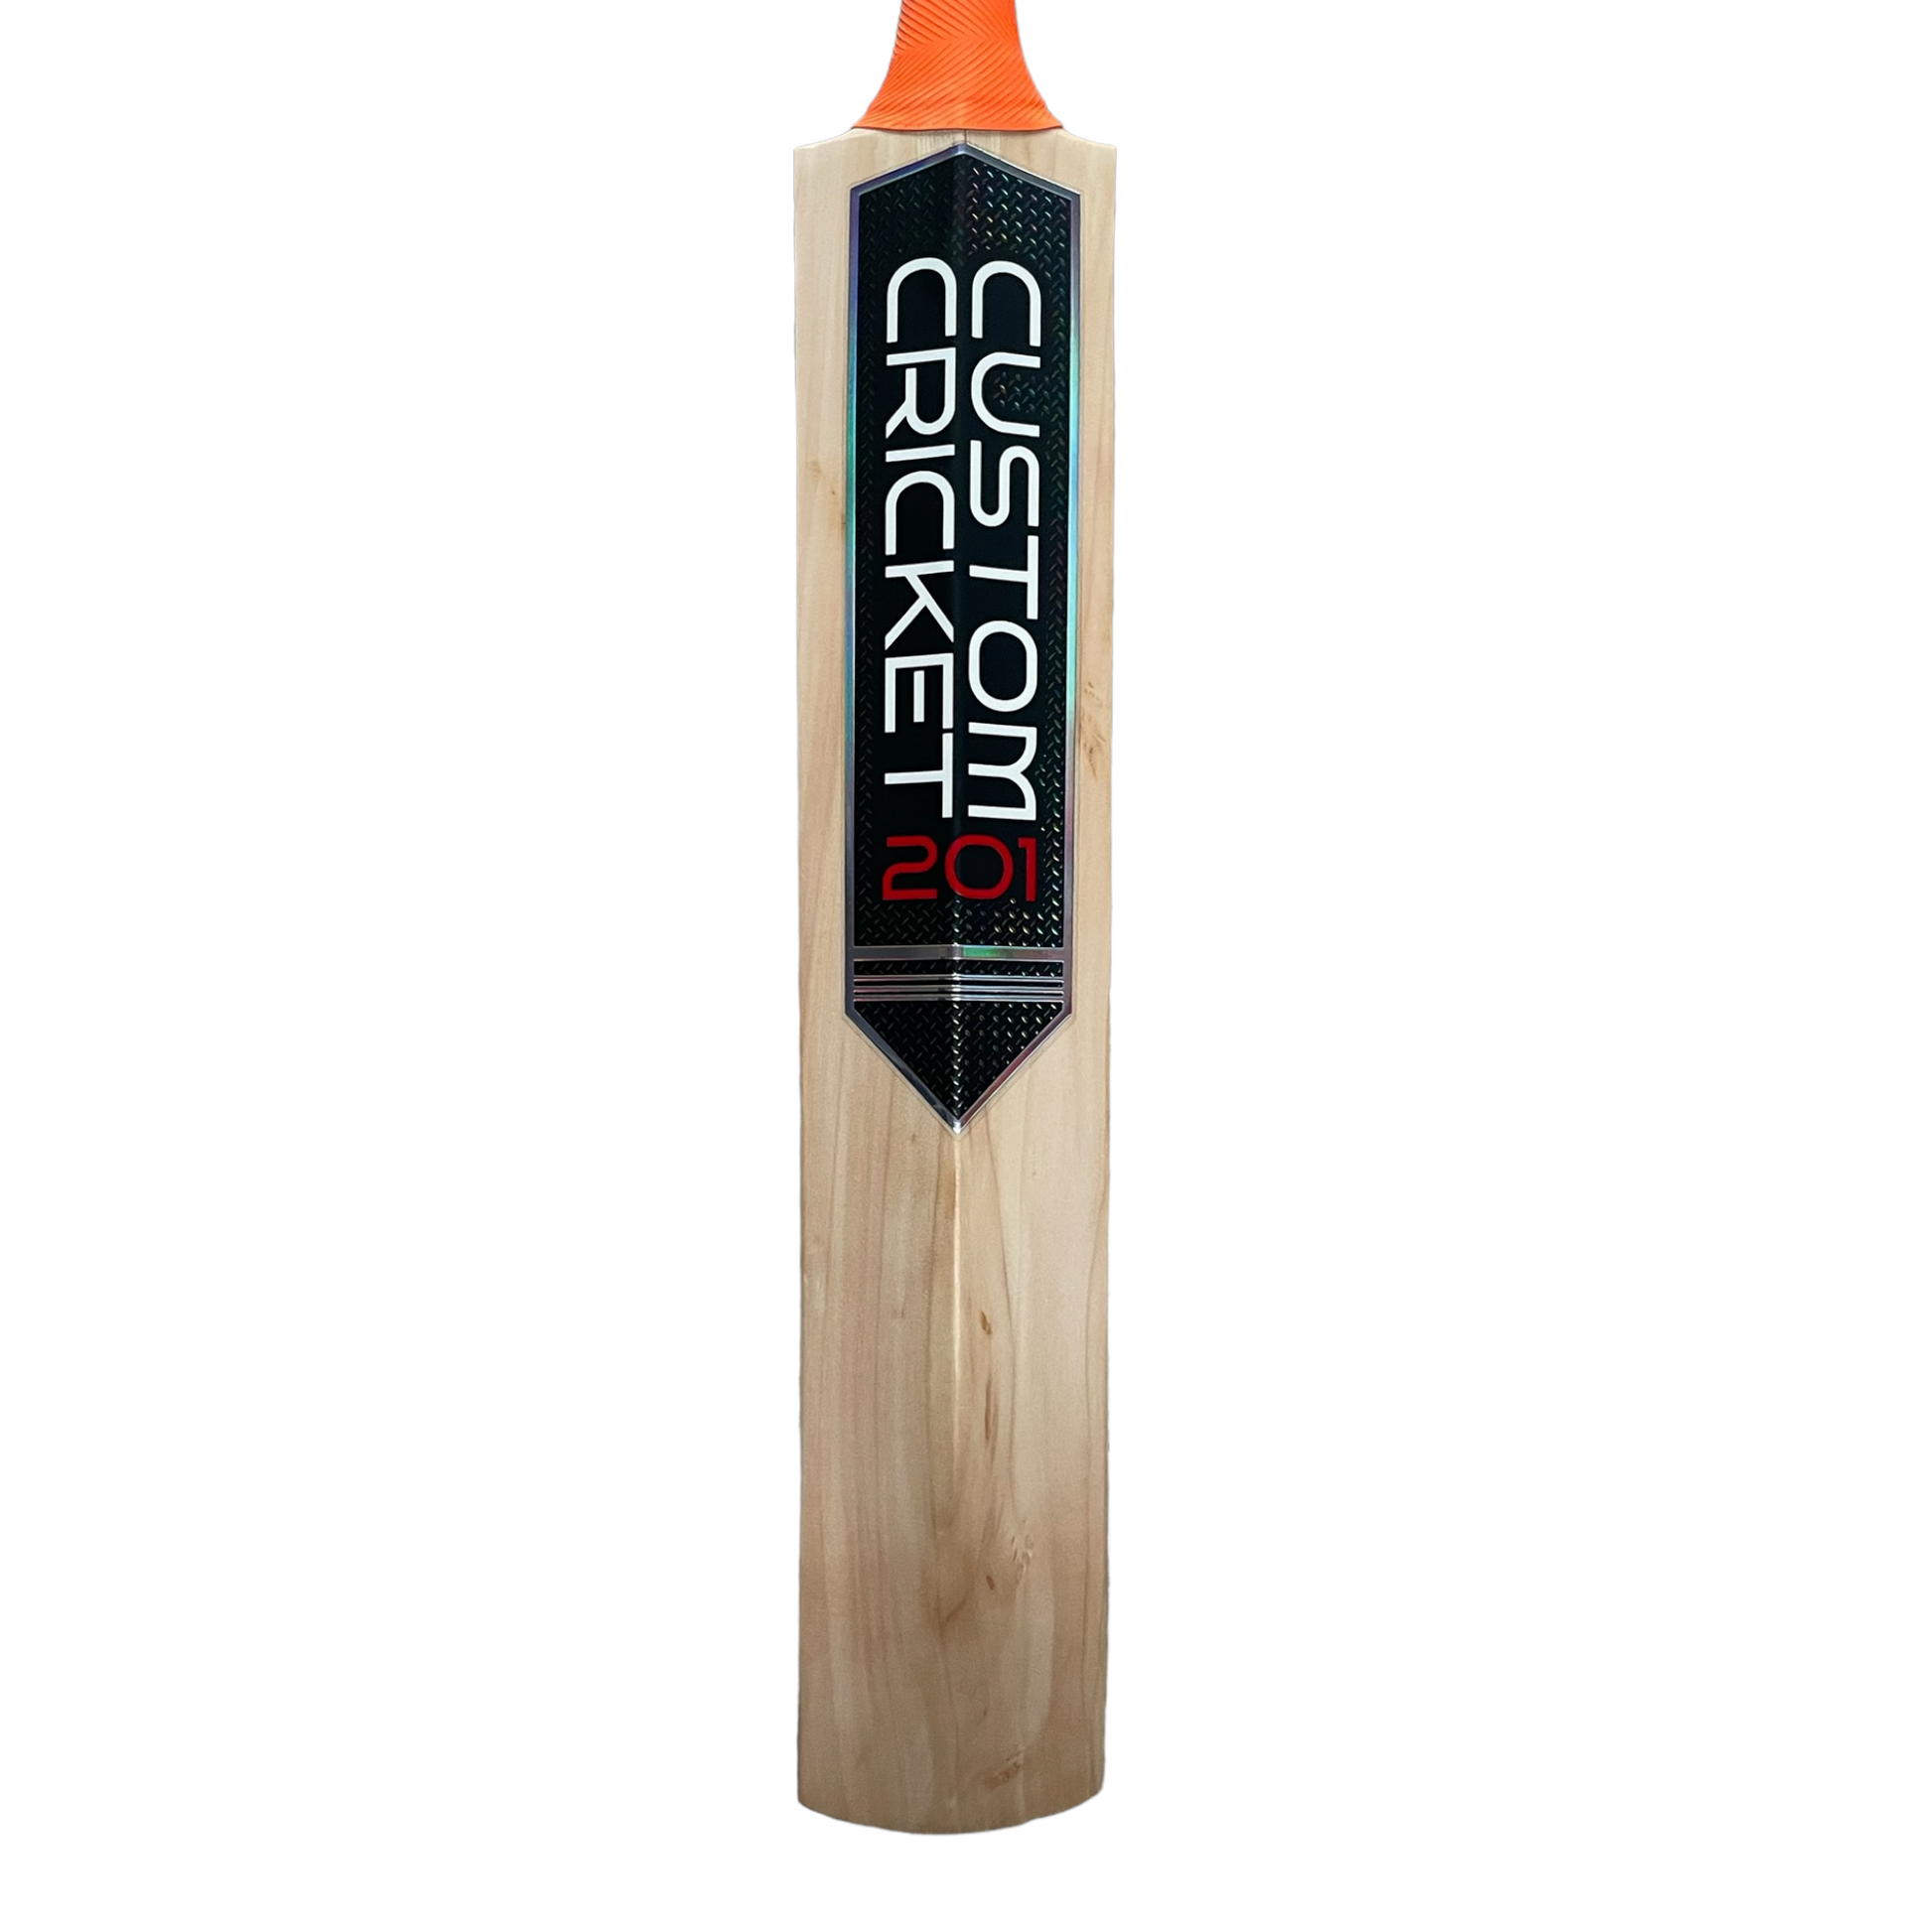 Youth childs kids cricket bat size 4 size 5 size 6 english willow handmade handcrafted christmas present online store showroom brighton and hove sussex, surrey hampshire kent london essex wales  